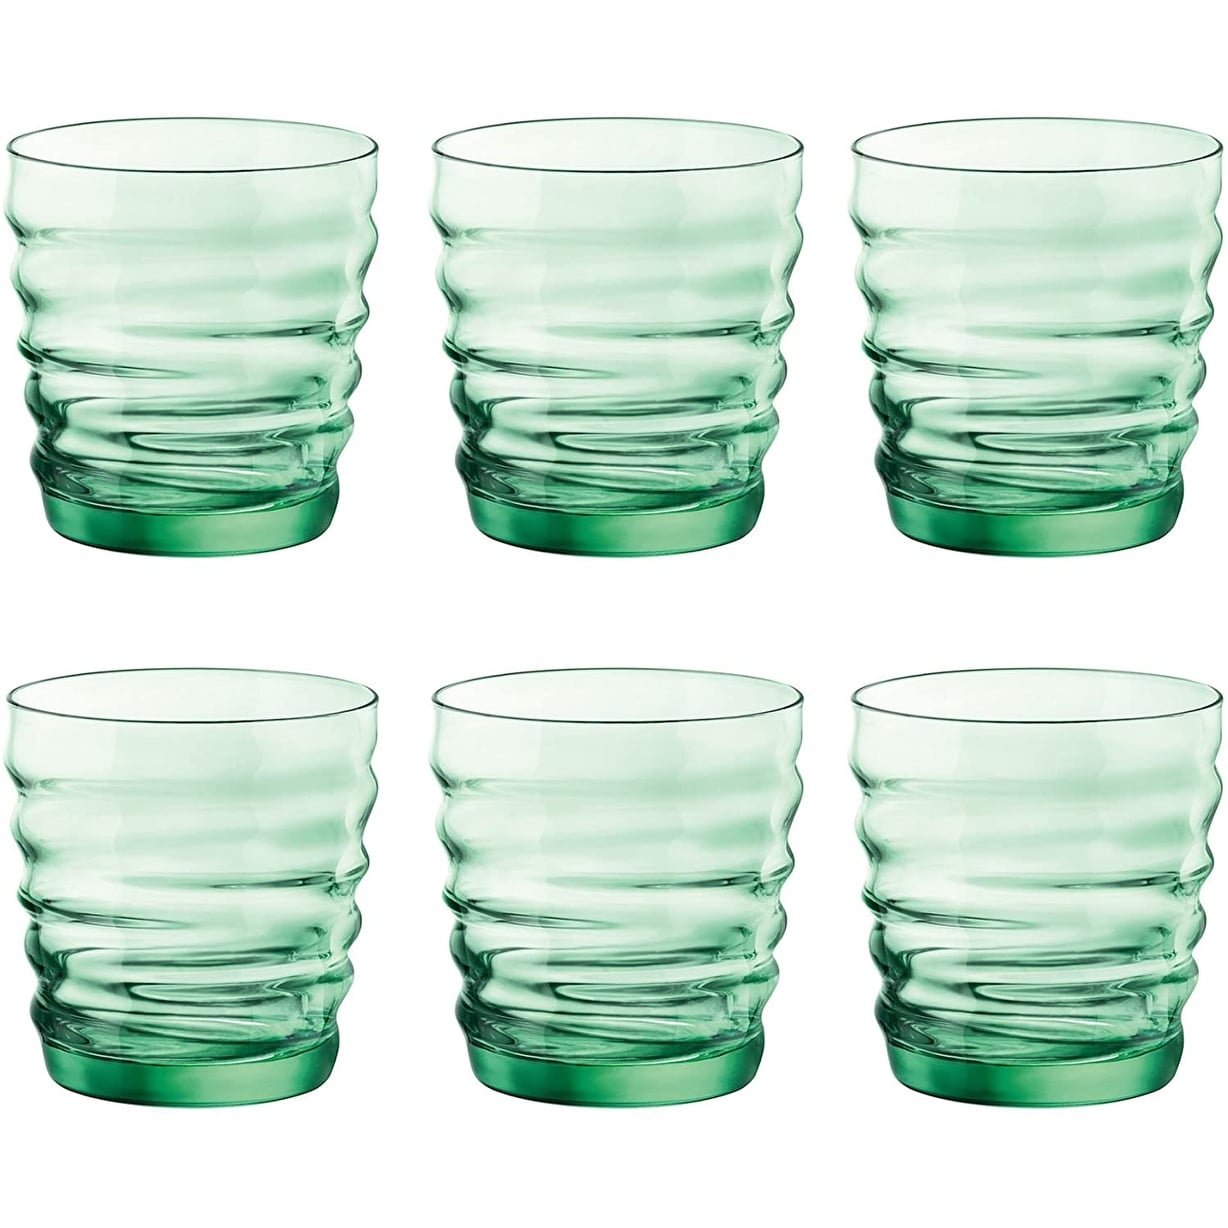 https://ak1.ostkcdn.com/images/products/is/images/direct/2b44f7b200968b7b6d7c83e2b8b04bfdfbb5db83/Bormioli-Rocco-Riflessi-Water-Glass-Set-of-6.jpg